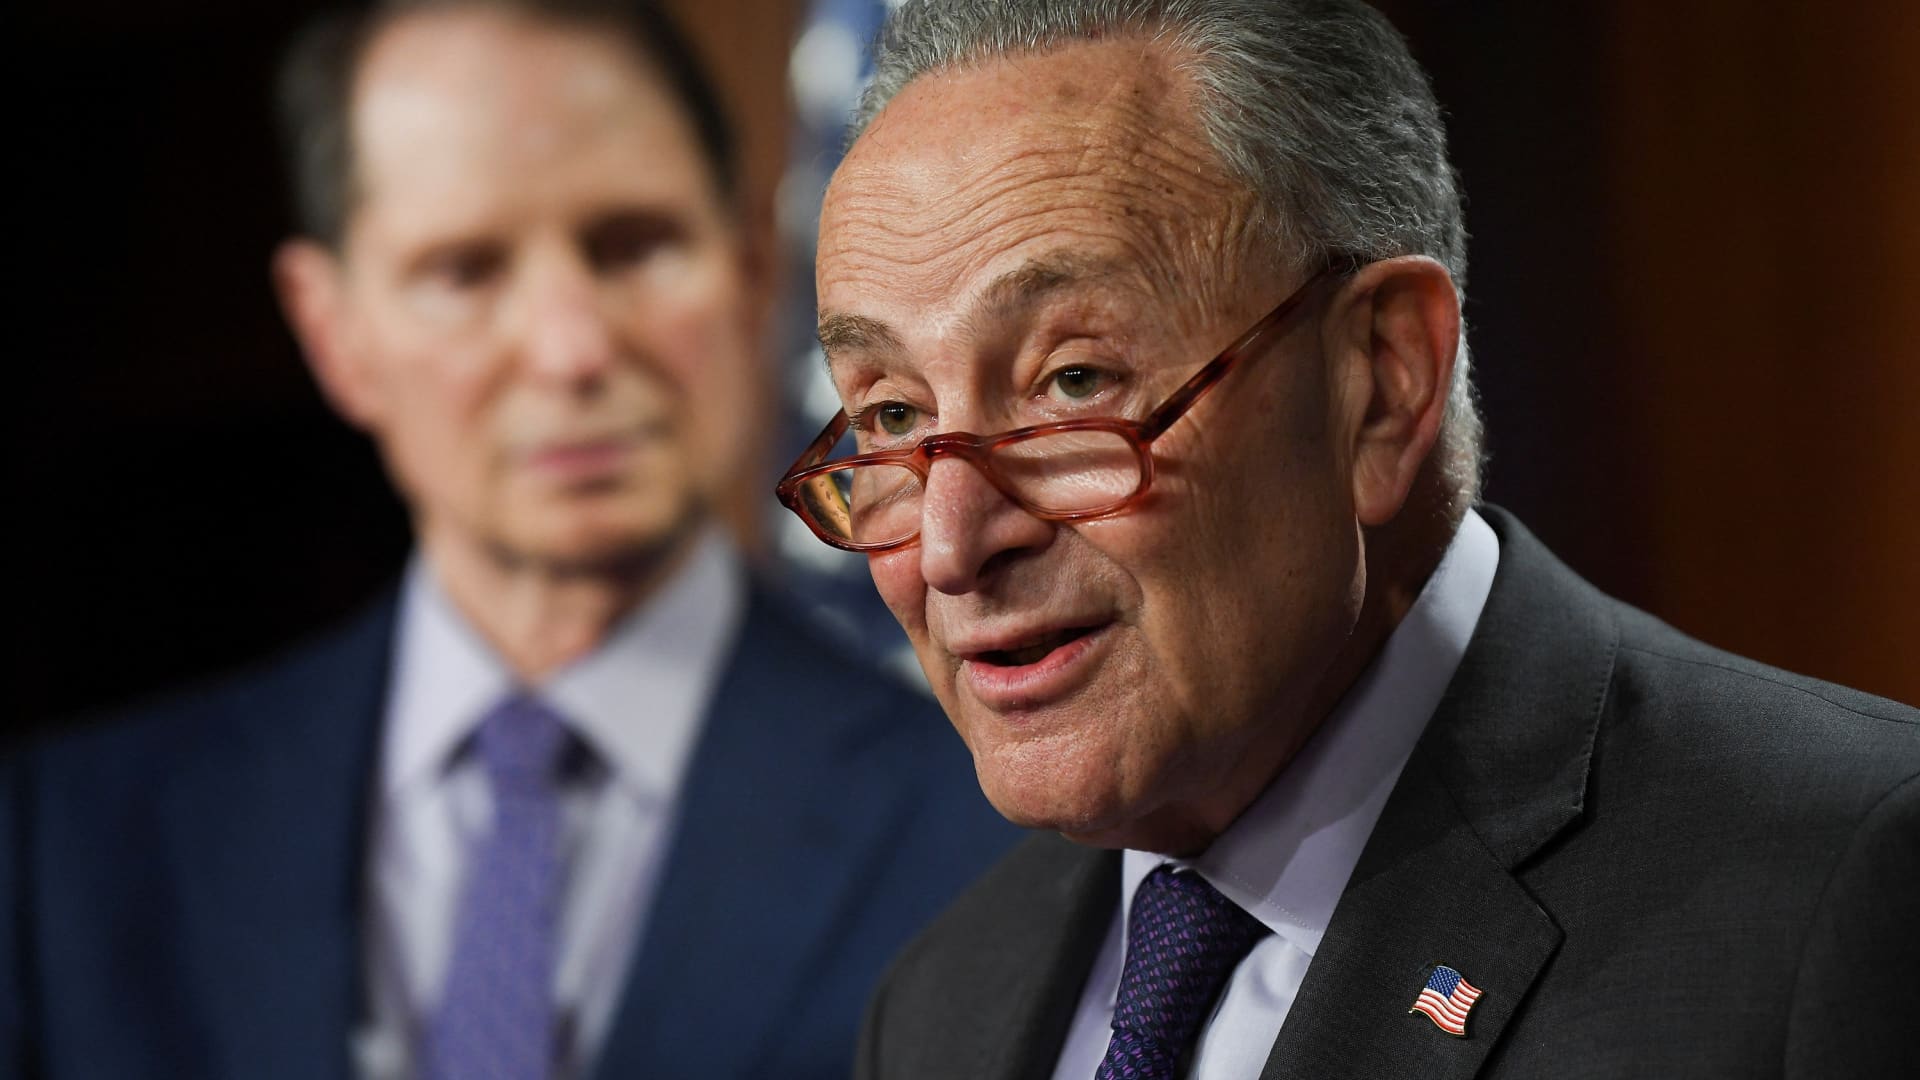 Chuck Schumer will give campaign donations from Silicon Valley Bank’s ex-CEO, PAC to charity